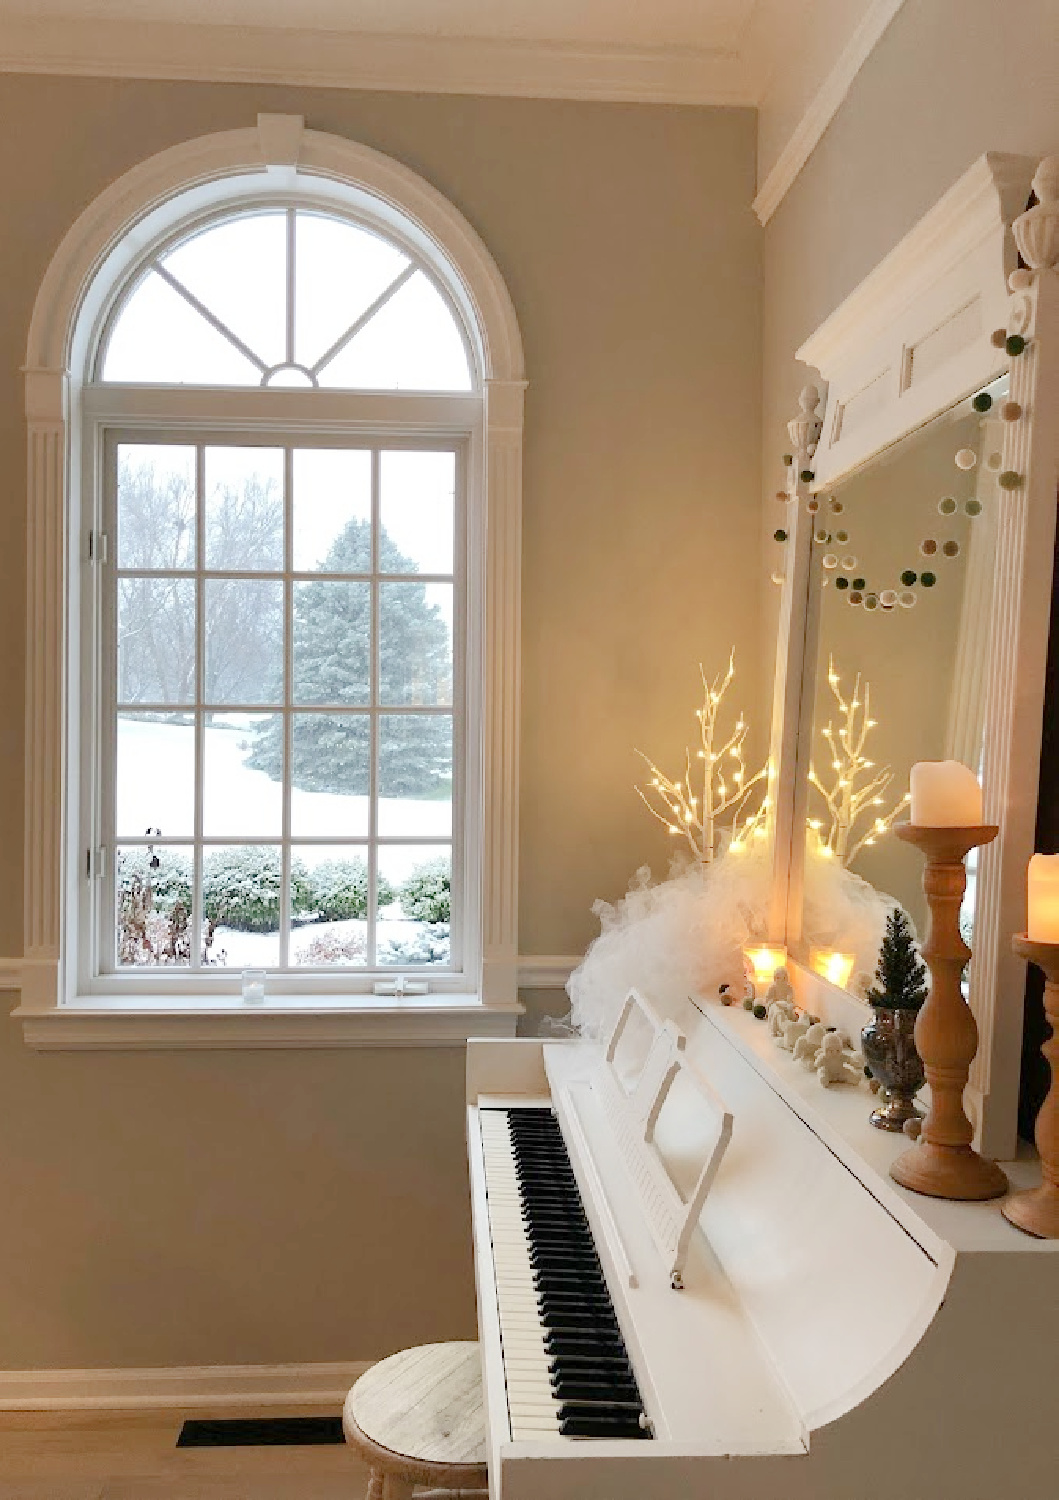 My vintage white piano decorated for Christmas and snow outside the arched window in the music room - Hello Lovely Studio.